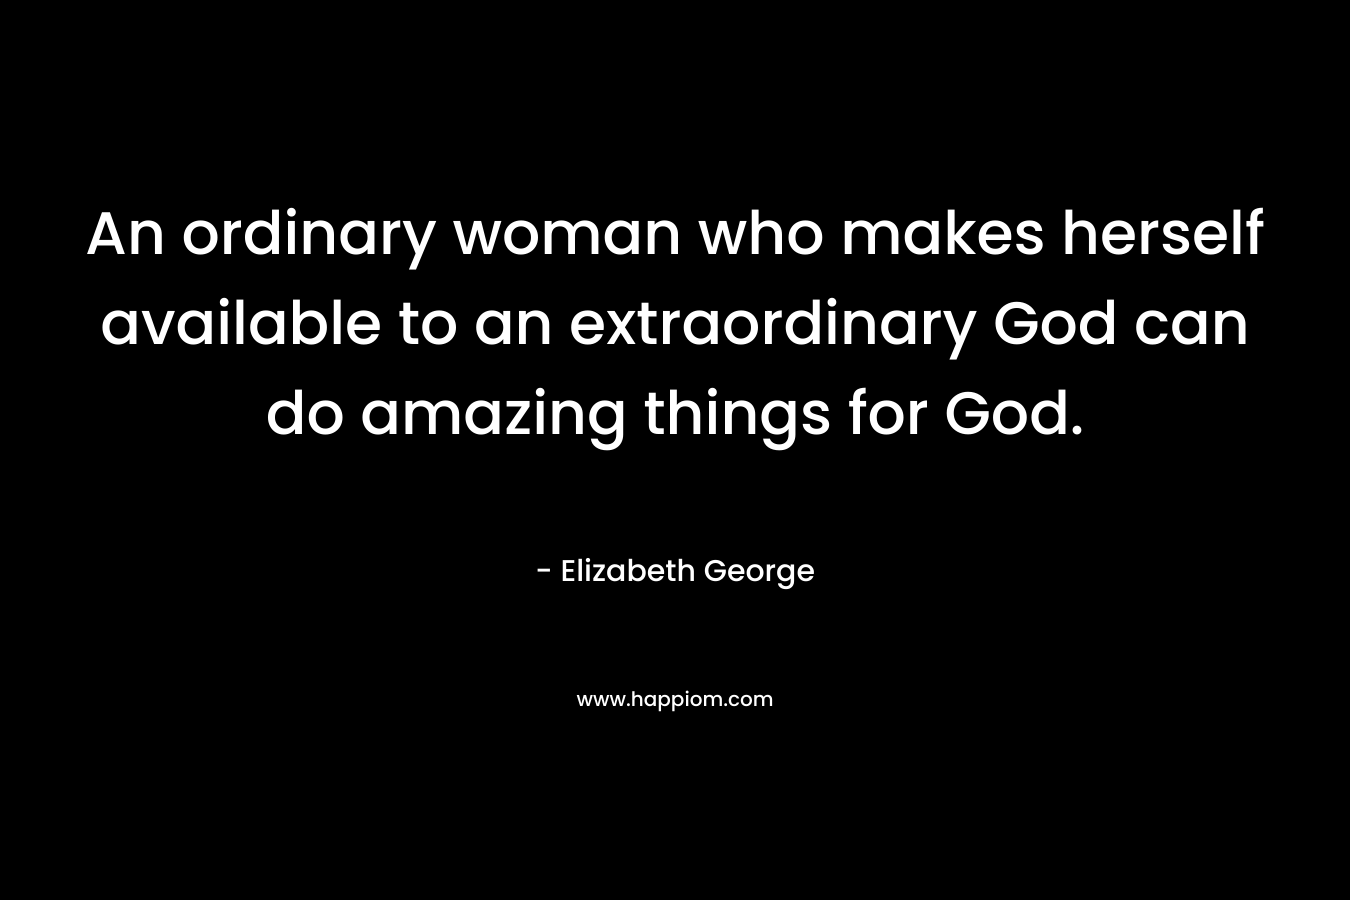 An ordinary woman who makes herself available to an extraordinary God can do amazing things for God.